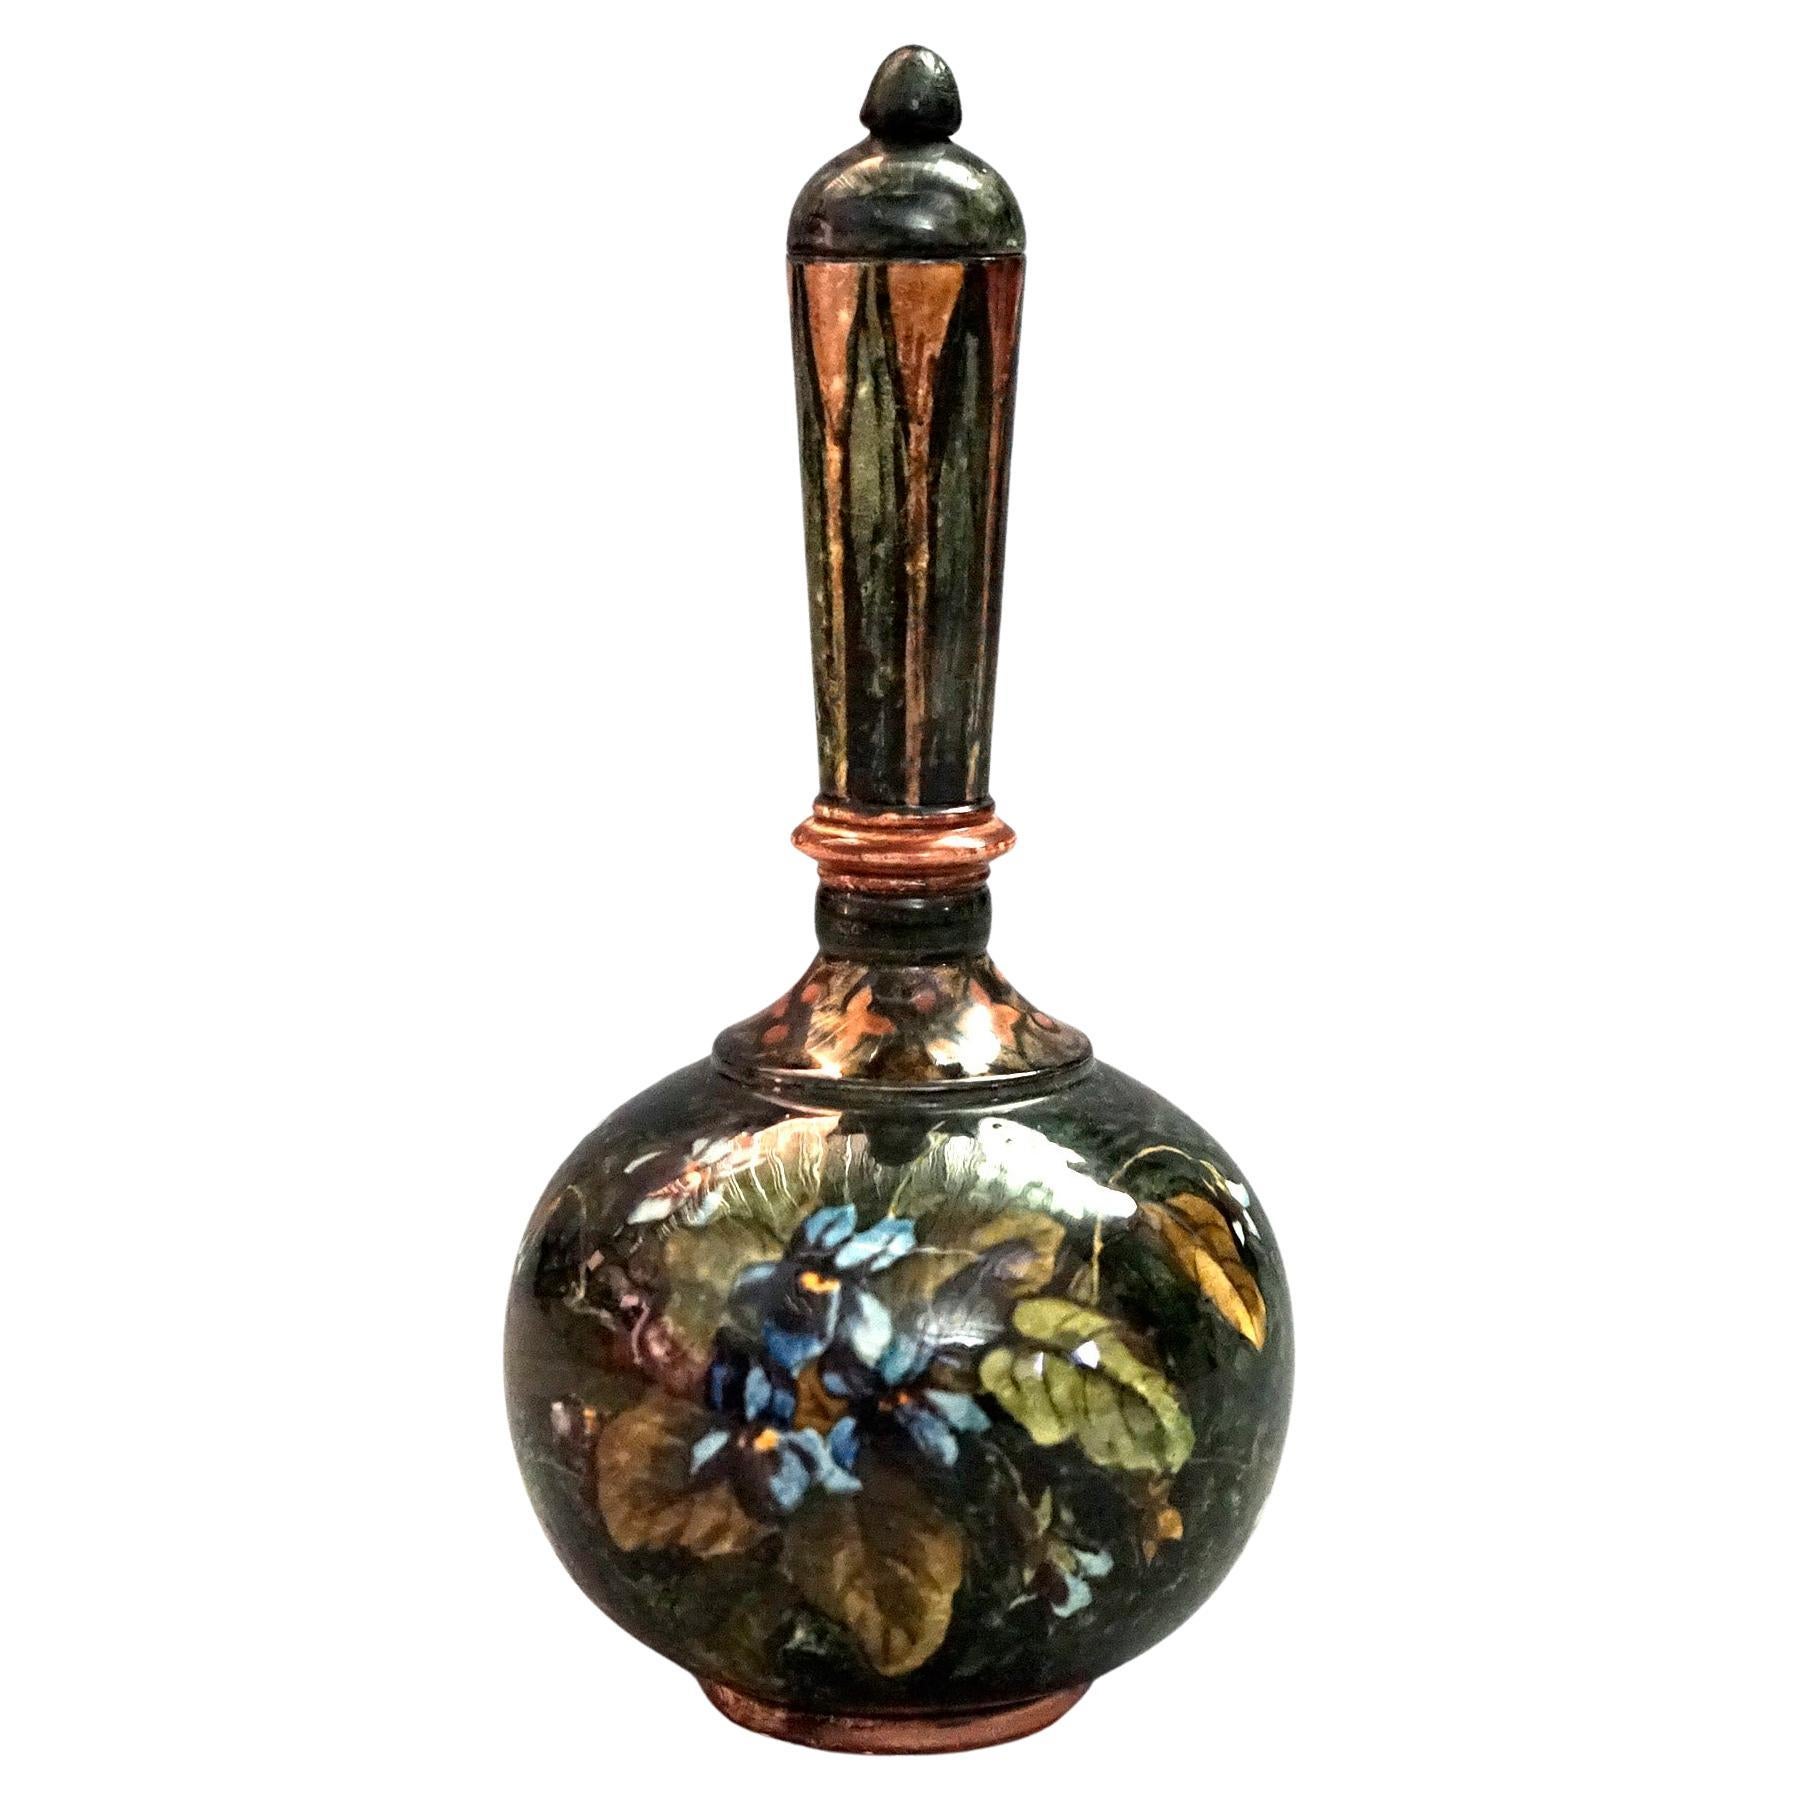 A rare and pristine museum-quality antique bottle vase by John Bennett of New York, NY offers art pottery construction in bulbous bottle form with hand painted floral decoration and lid (very unusual to have the lid), artist signed and dated 1878 on